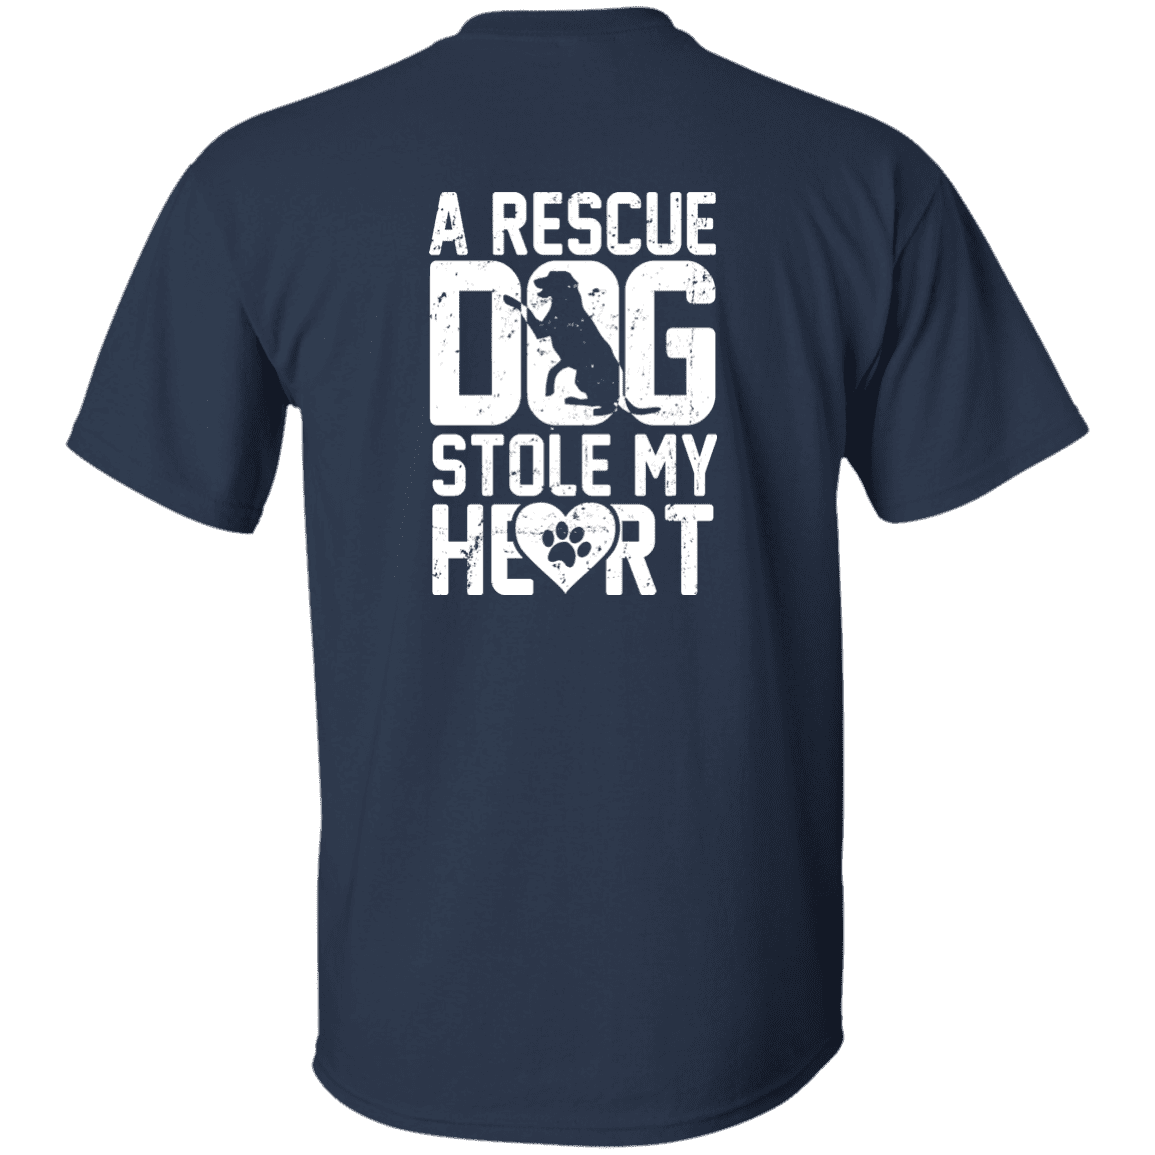 A Rescue Dog Stole My Heart - T Shirt.